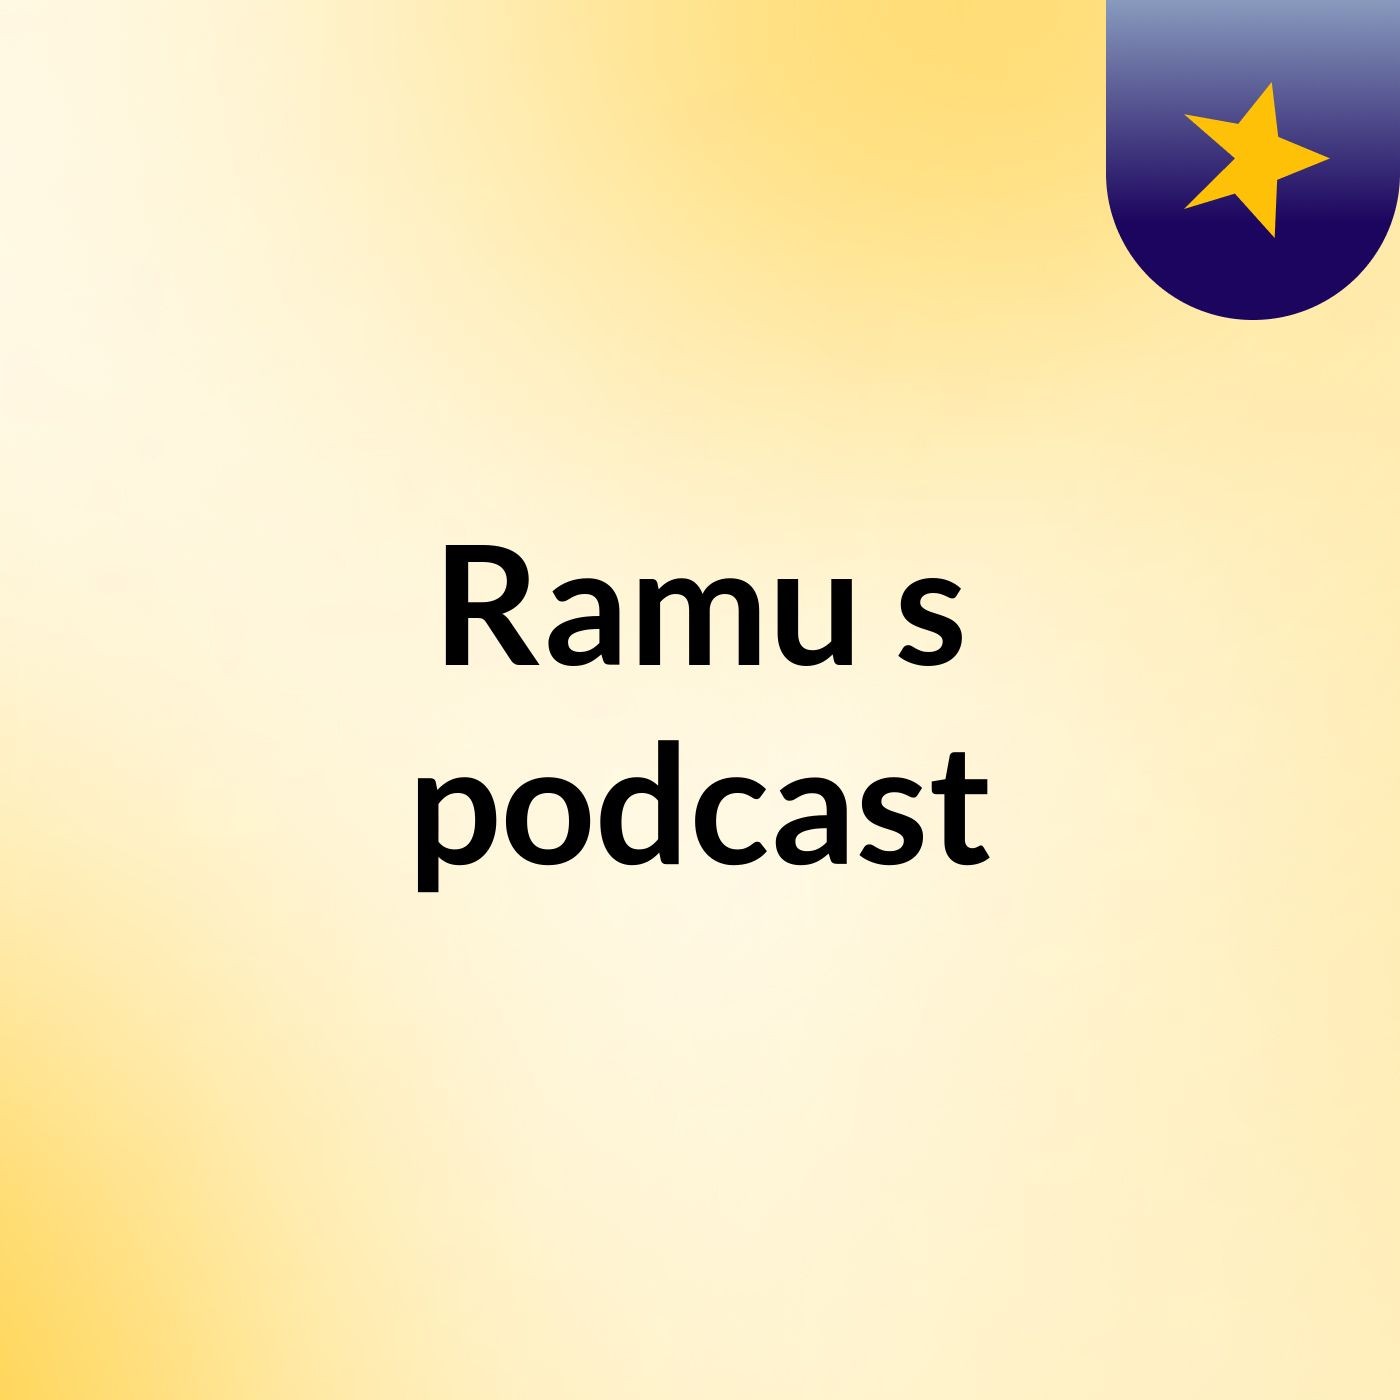 Social Work In Disaster Management Episode 4 - Ramu's podcast